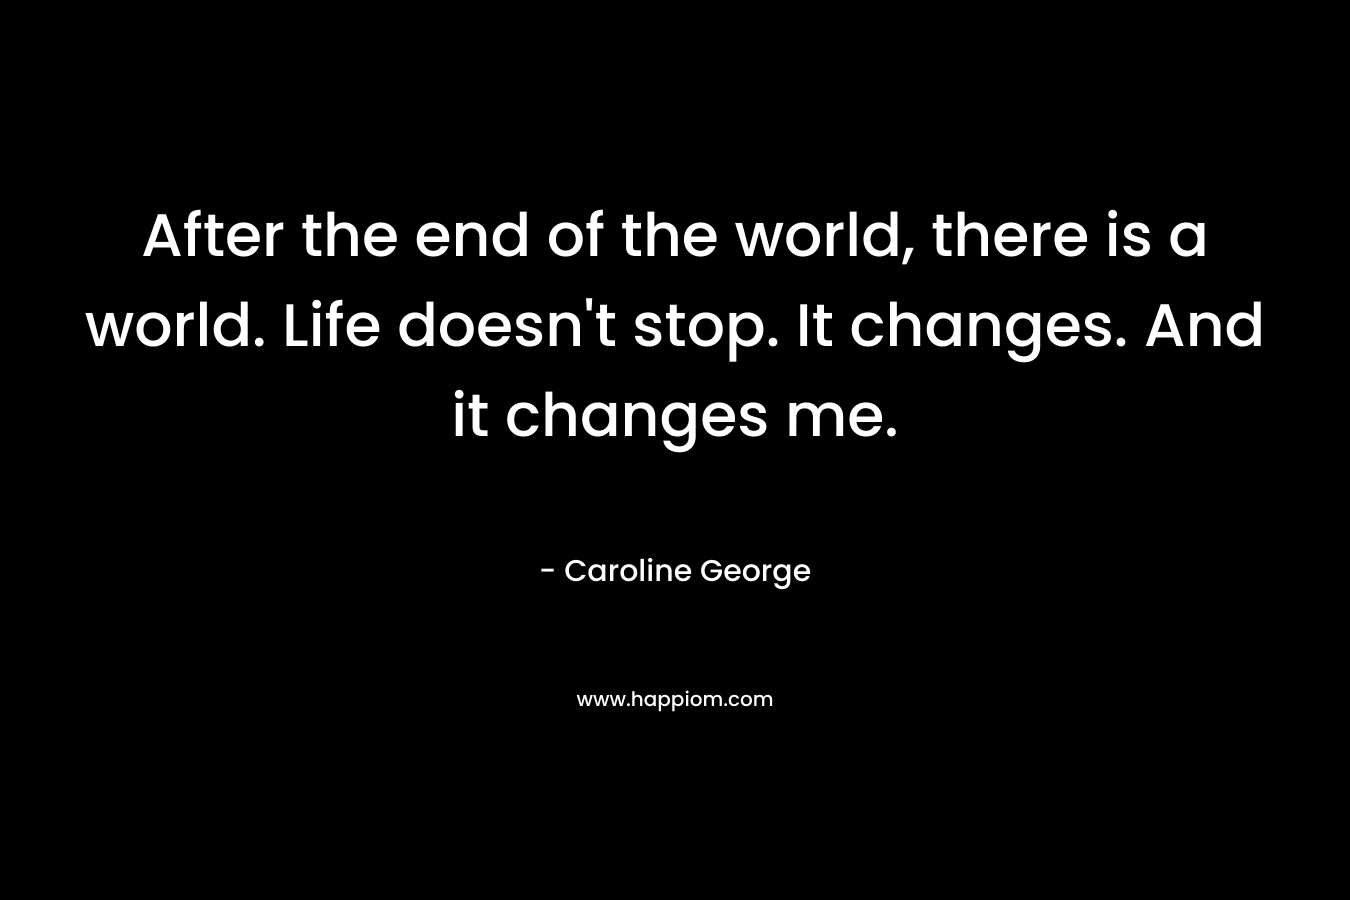 After the end of the world, there is a world. Life doesn't stop. It changes. And it changes me.